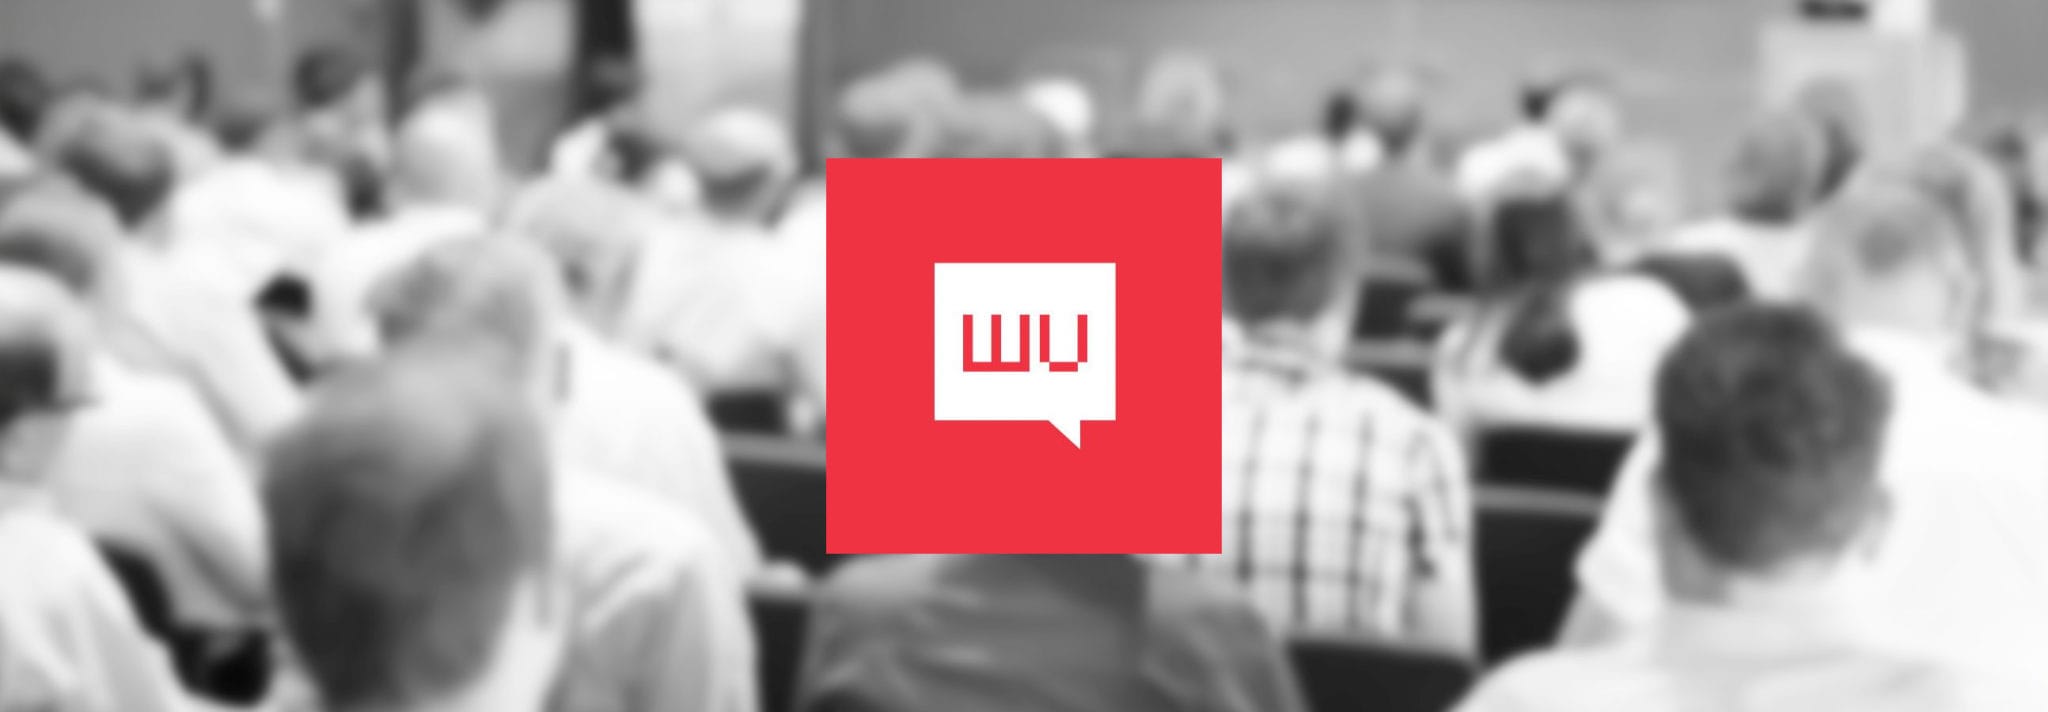 WebVisions | Chicago | 2015